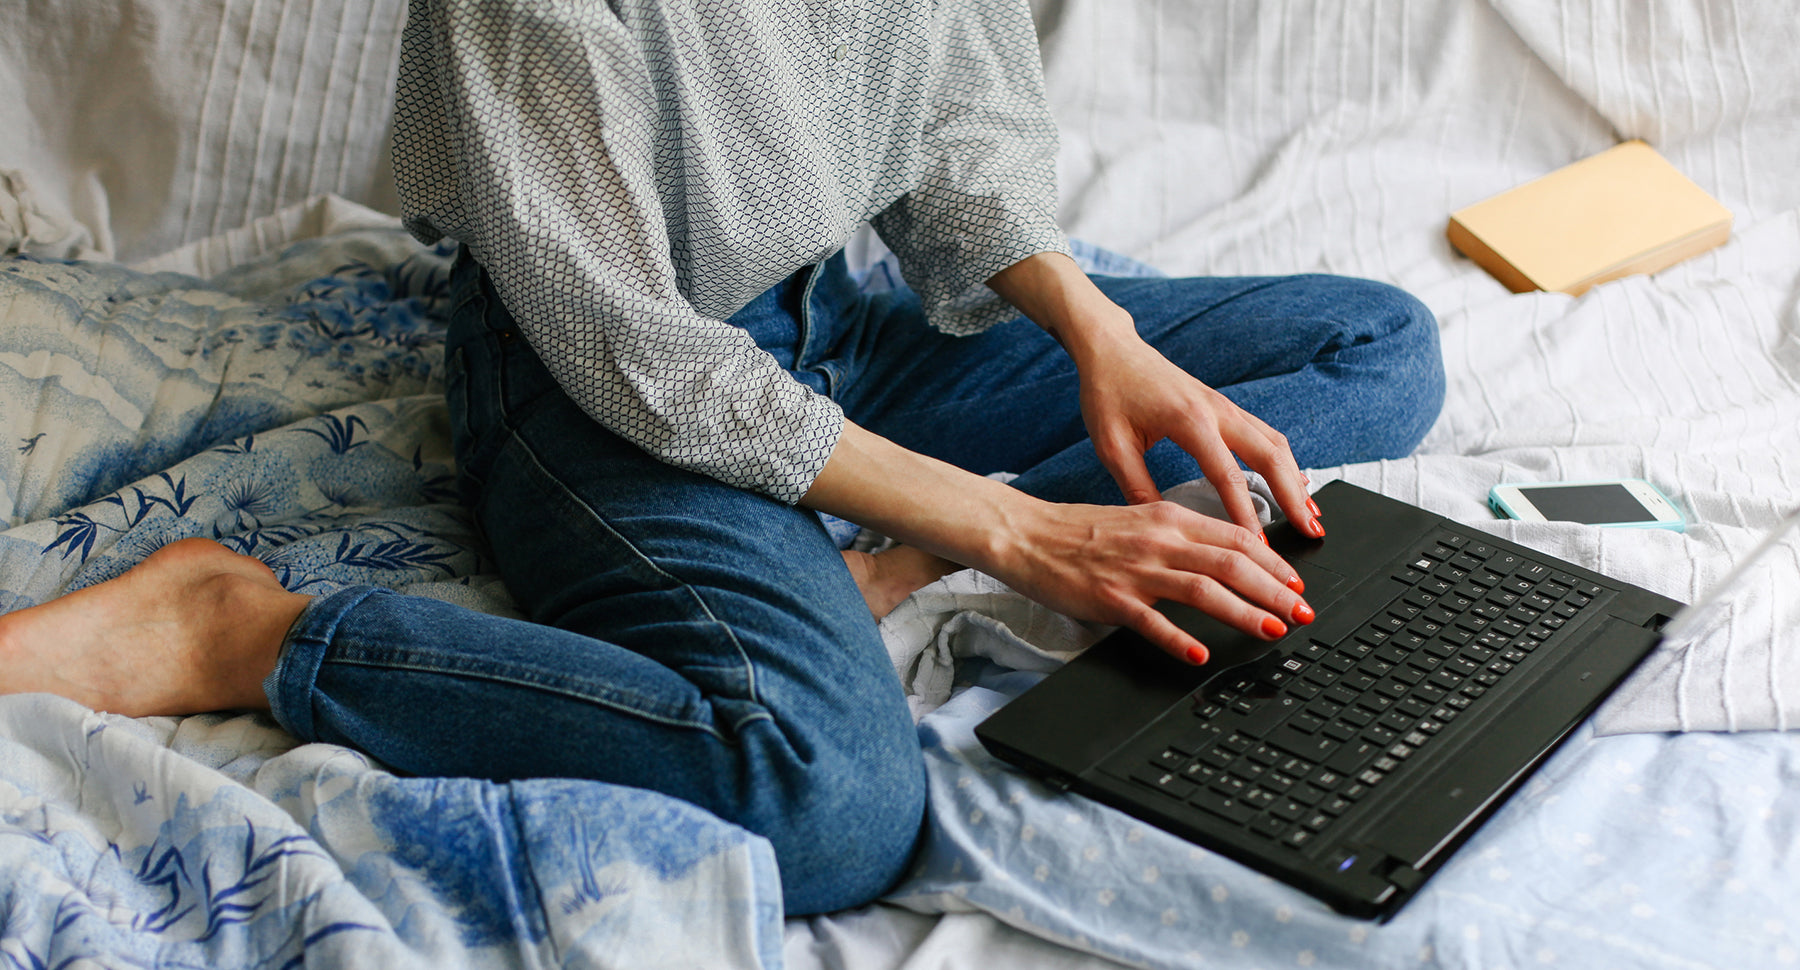 female subject sitting on her bed in blue jeans typing on her laptop and registering her domain name